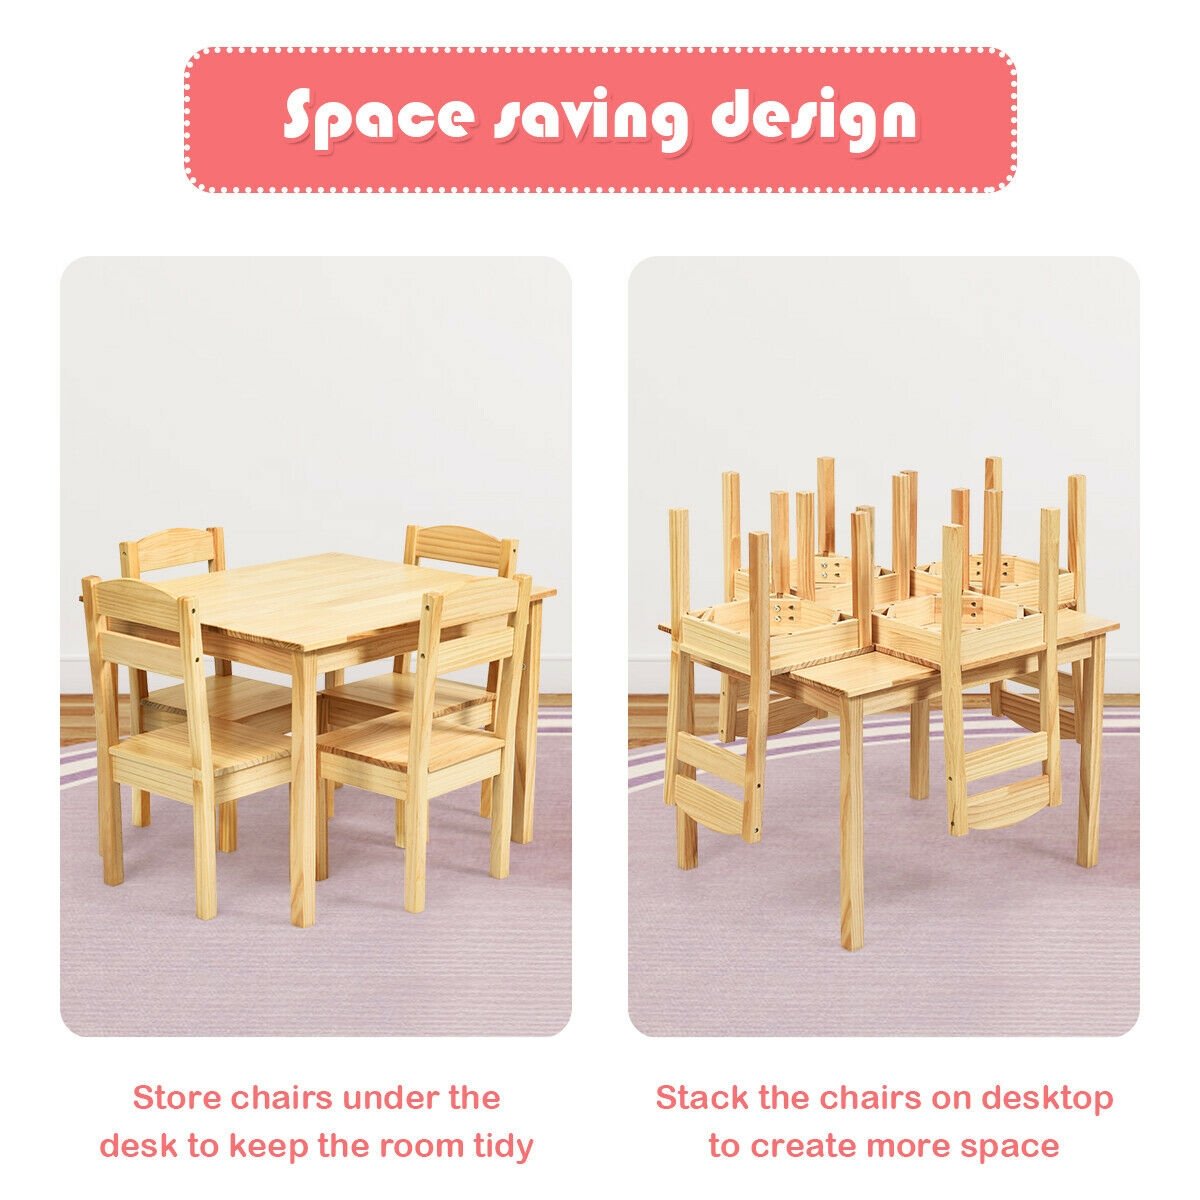 5 Pieces Kids Pine Wood Table Chair Set, Natural - Gallery Canada